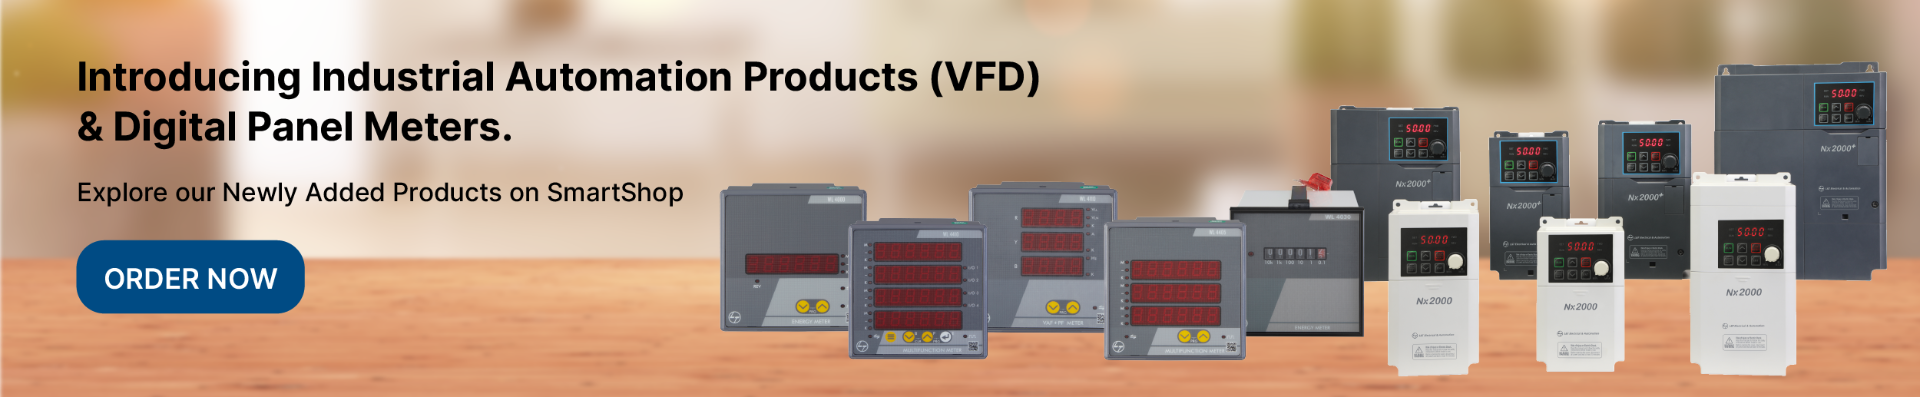 Industrial Automation Products (VFD) & Digital Panel Meters